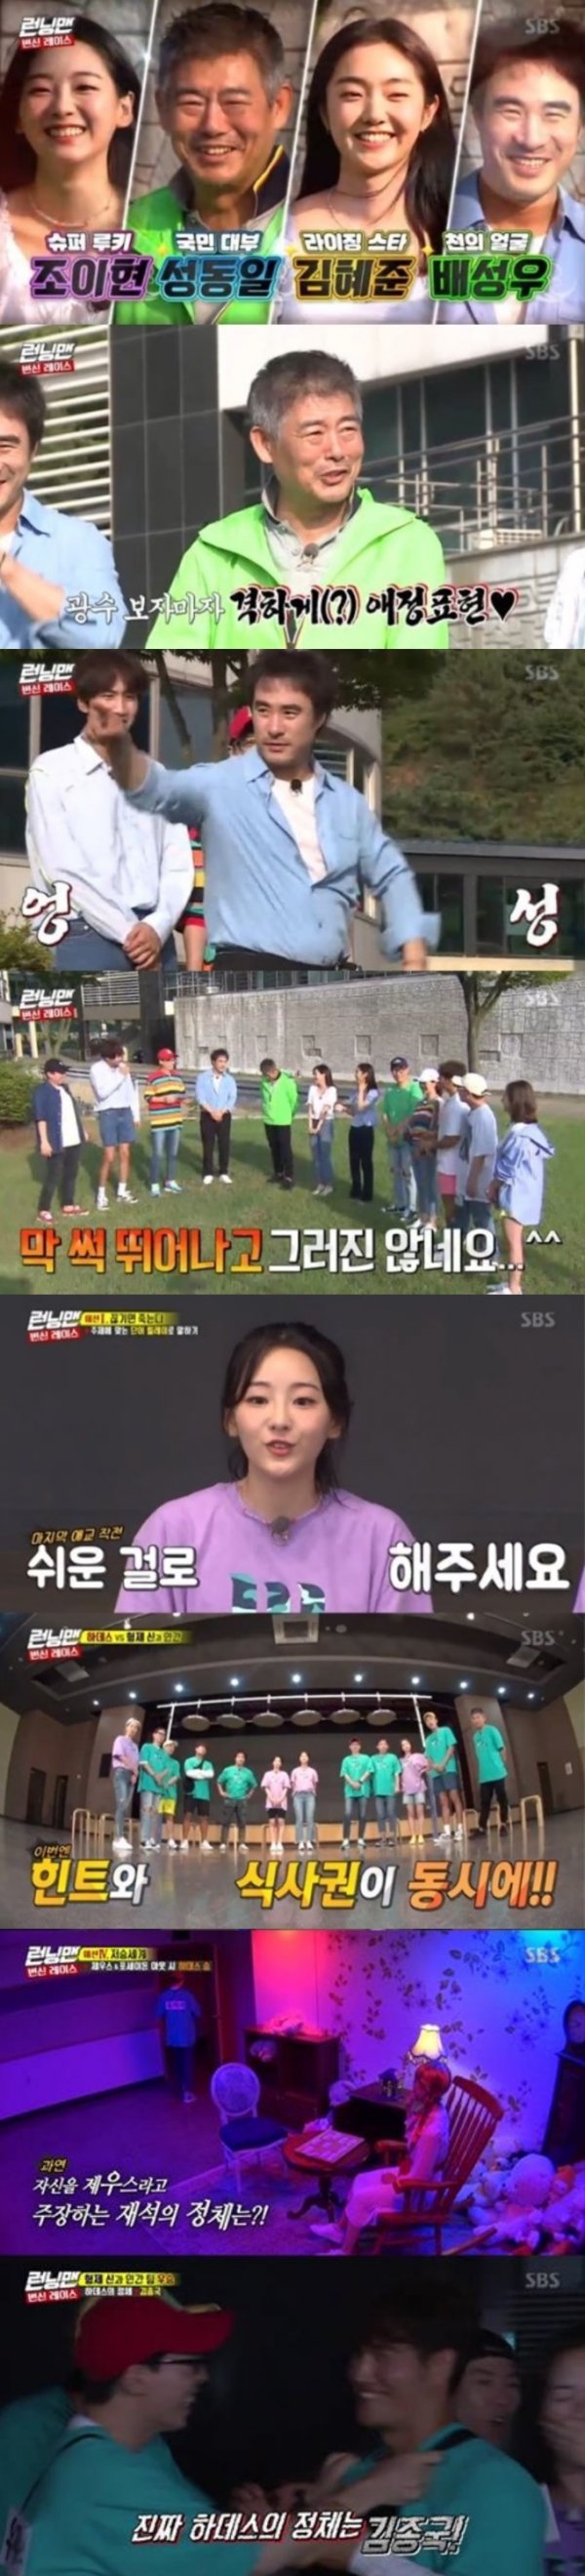 SBS Running Man took the top spot in the same time zone of 2049 target audience rating with a big gap.According to Nielsen Korea, the ratings agency, Running Man, which aired on the 11th, soared to 8.4% of the highest audience rating per minute, and the 2049 target audience rating, an important indicator of major advertising officials, recorded 3.7% (based on the second part of the audience rating of households in the metropolitan area), beating all Masked Wang and Donkey Ears.The show was accompanied by actor Sung Dong-il, Bae Seong-woo, Jo Yi-hyun and Kim Hye-joon of the movie Transform.The members challenged various missions to find Hades, Zeus, and Poseidon gods, and the chewy race that led to doubting each other until the end was exciting.Along with this, the performance of the guests also shone.Sung Dong-il, like Lee Kwang-soos natural enemy, tightened Lee Kwang-soos breath and made a penalty, while Bae Seong-woo laughed with the charm of introducing a clumsy ballet.The final mission was decorated with the horror special The Underworld Race.In order for the brothers and men to win the championship, they have to make Hades in-N-Out Burger, and if Hades makes Zeus and Poseidon in In-N-Out Burger, Hades will win alone.The members gathered hints at the appearance of ghosts in the race, and Yoo Jae-Suk and Kim Jong-kook were selected as candidates for Hades.In the meantime, Yoo Jae-Suk put Kim Jong-kooks name tag on the Hades chair that Lee Kwang-soo found, and finally Hades was revealed as Kim Jong-kook.The scene recorded the highest audience rating of 8.4% per minute, accounting for the best one minute.